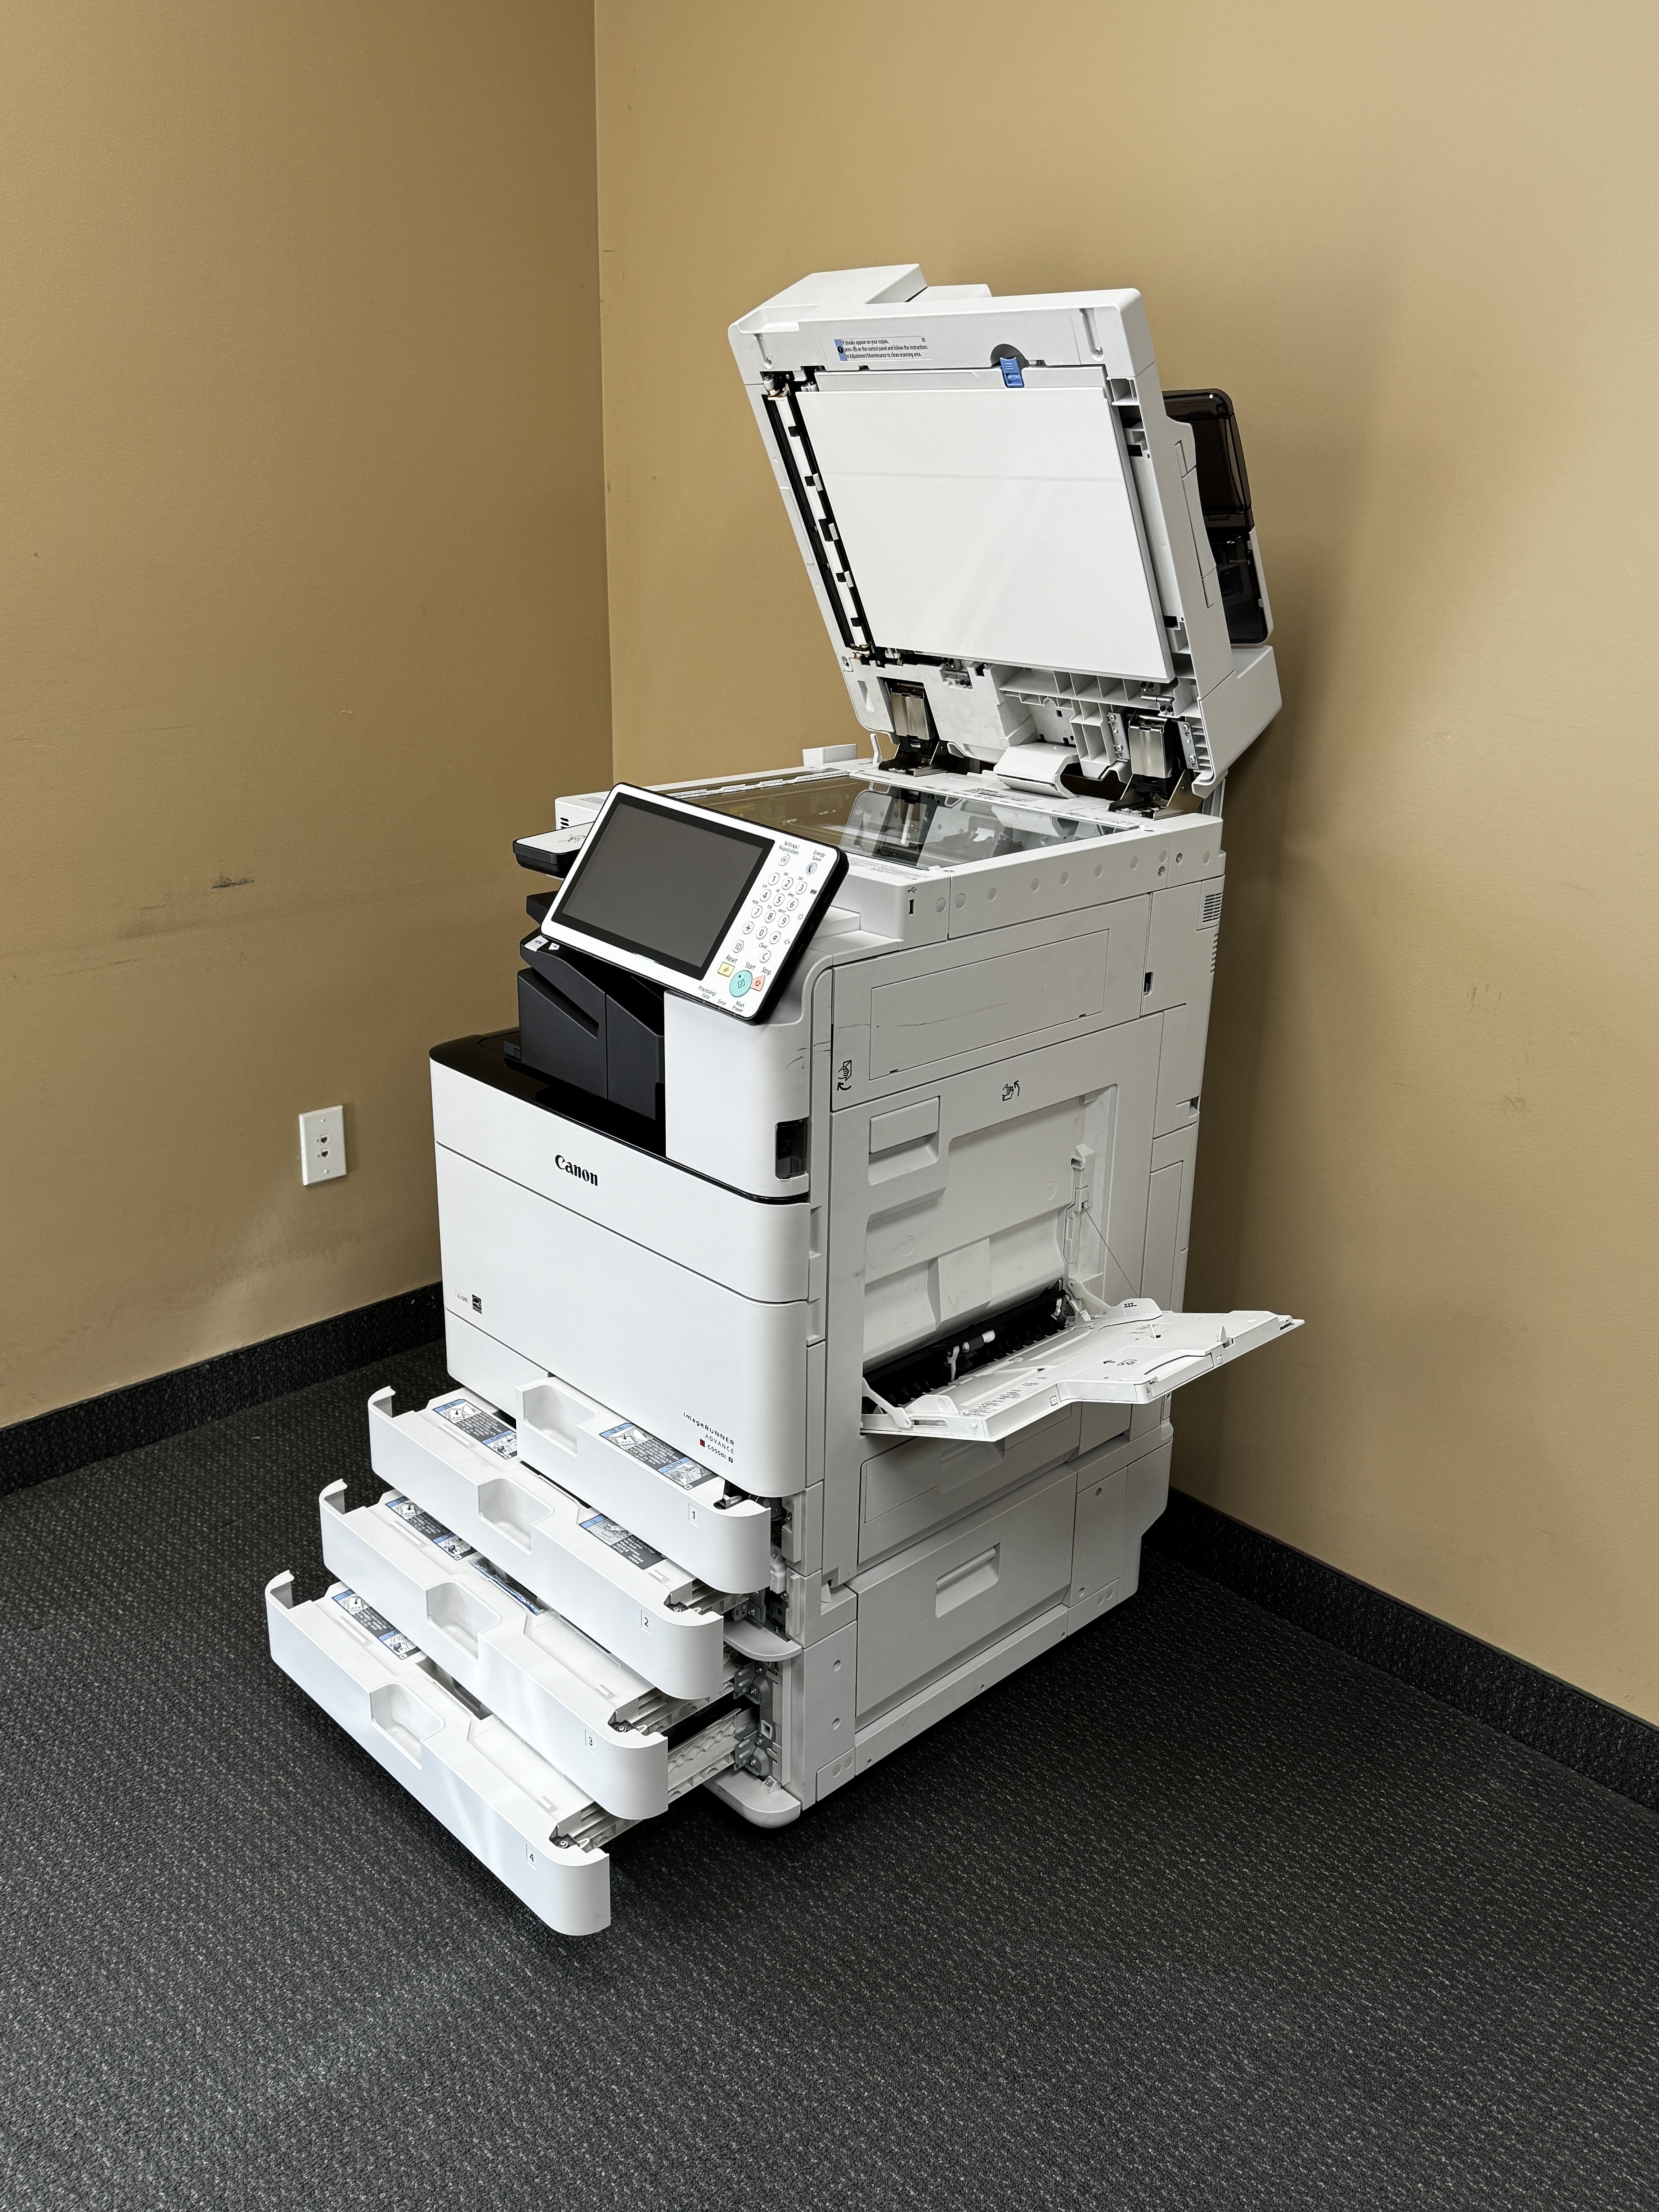 Canon copier used in large document scanning. 